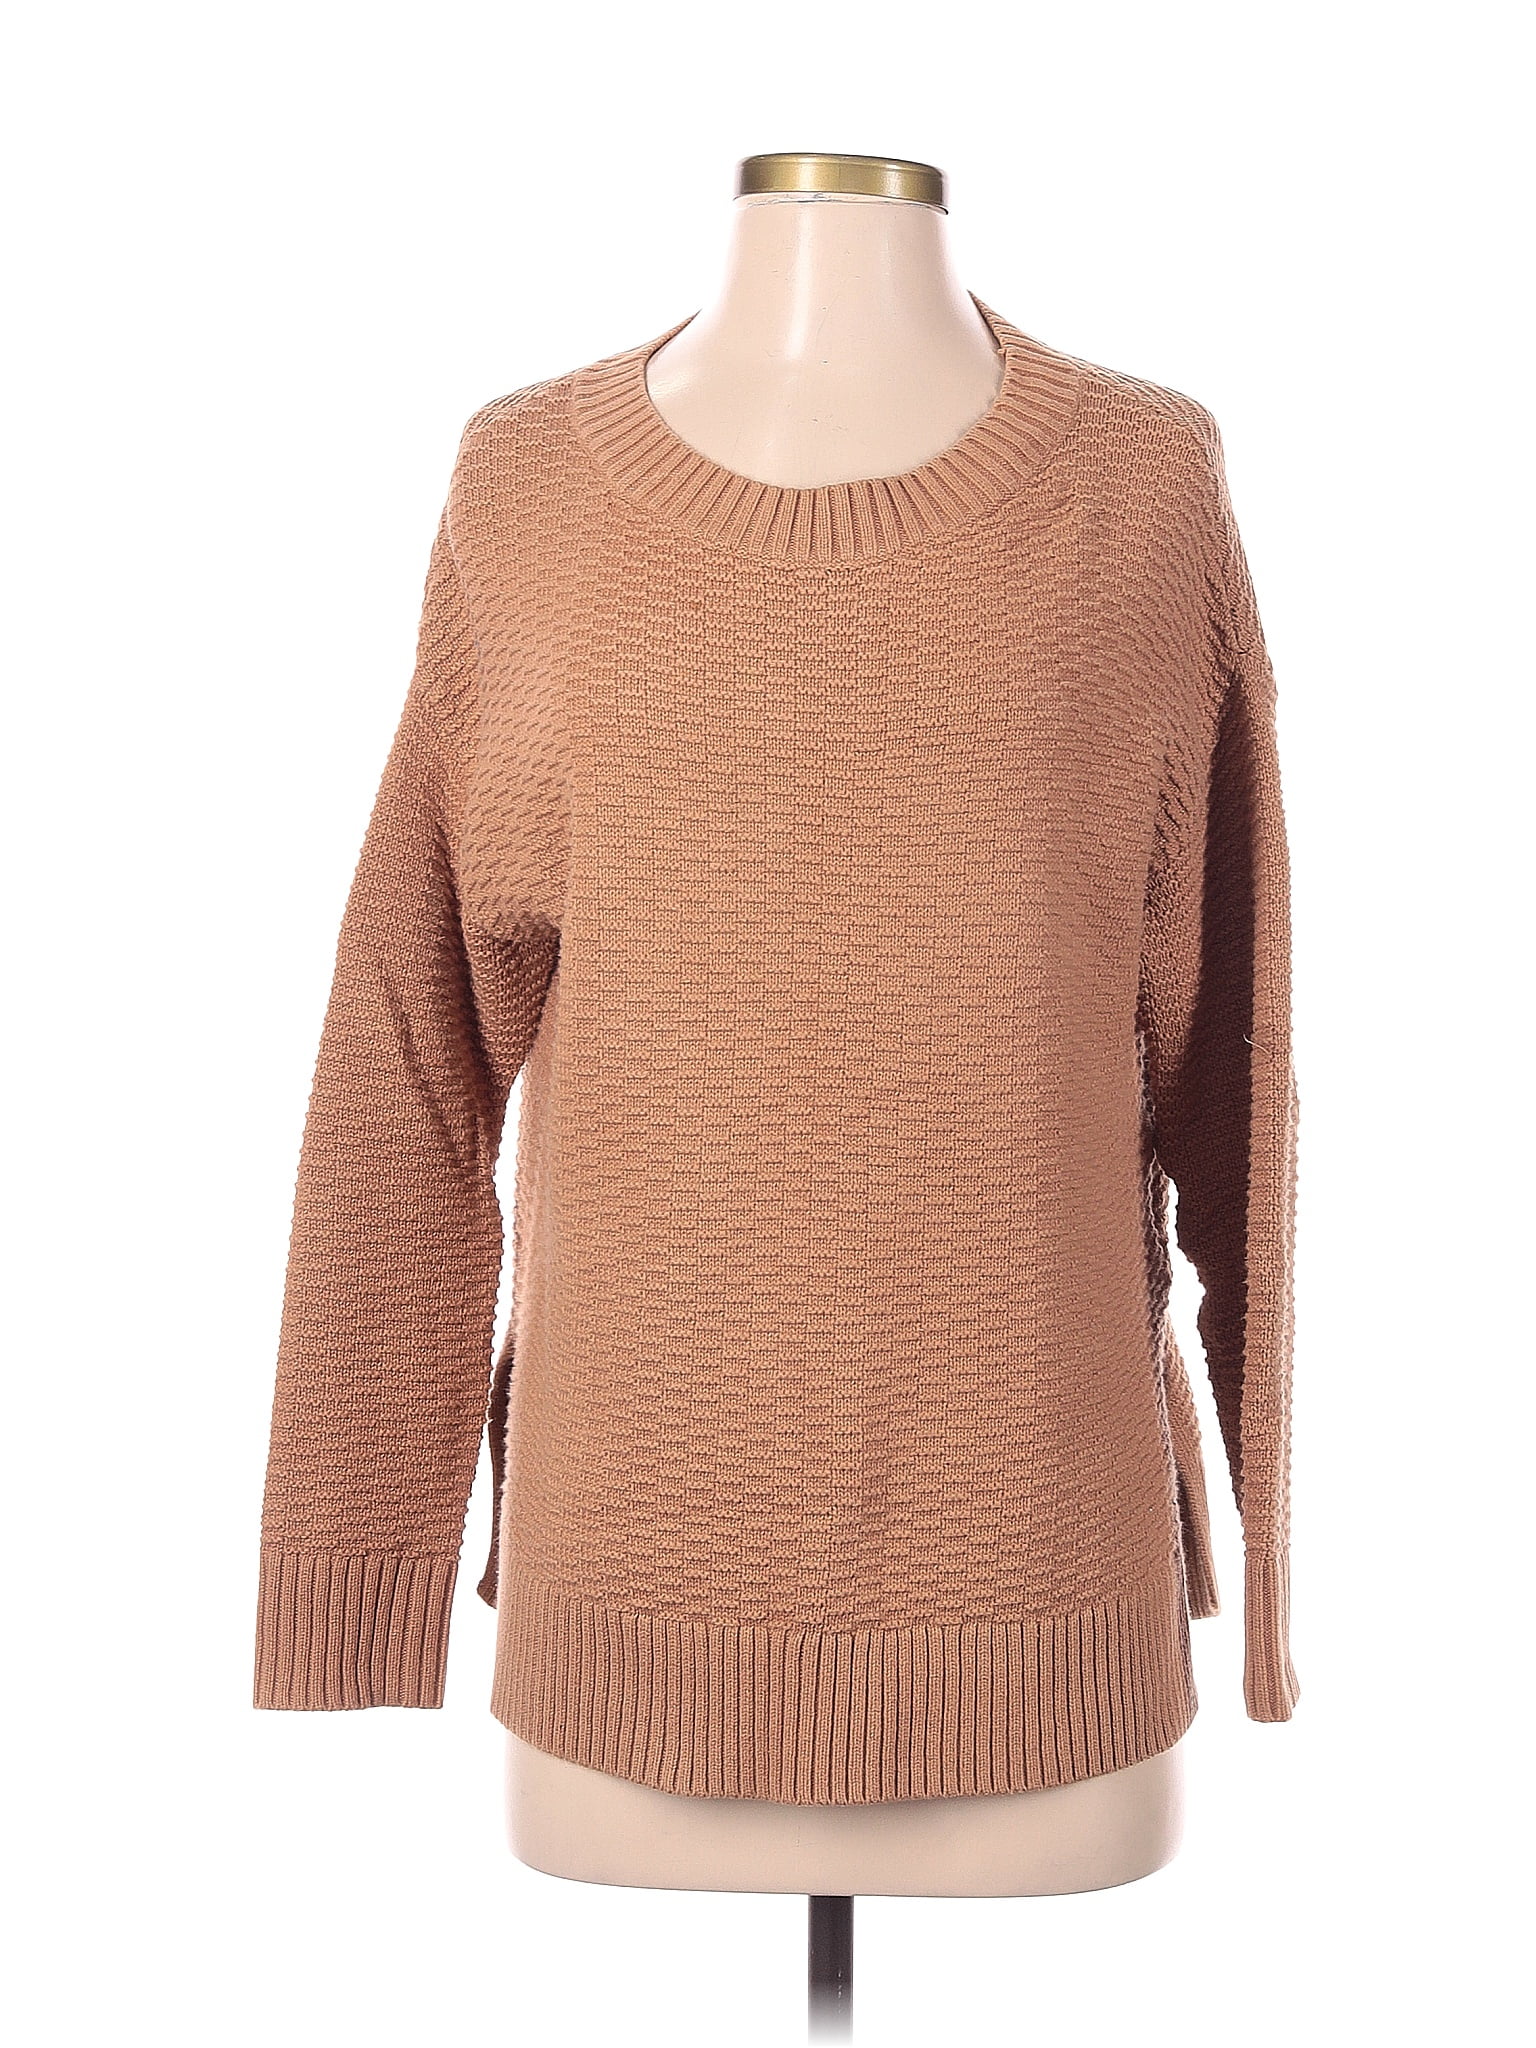 J.Jill 100% Cotton Color Block Solid Tan Pullover Sweater Size S